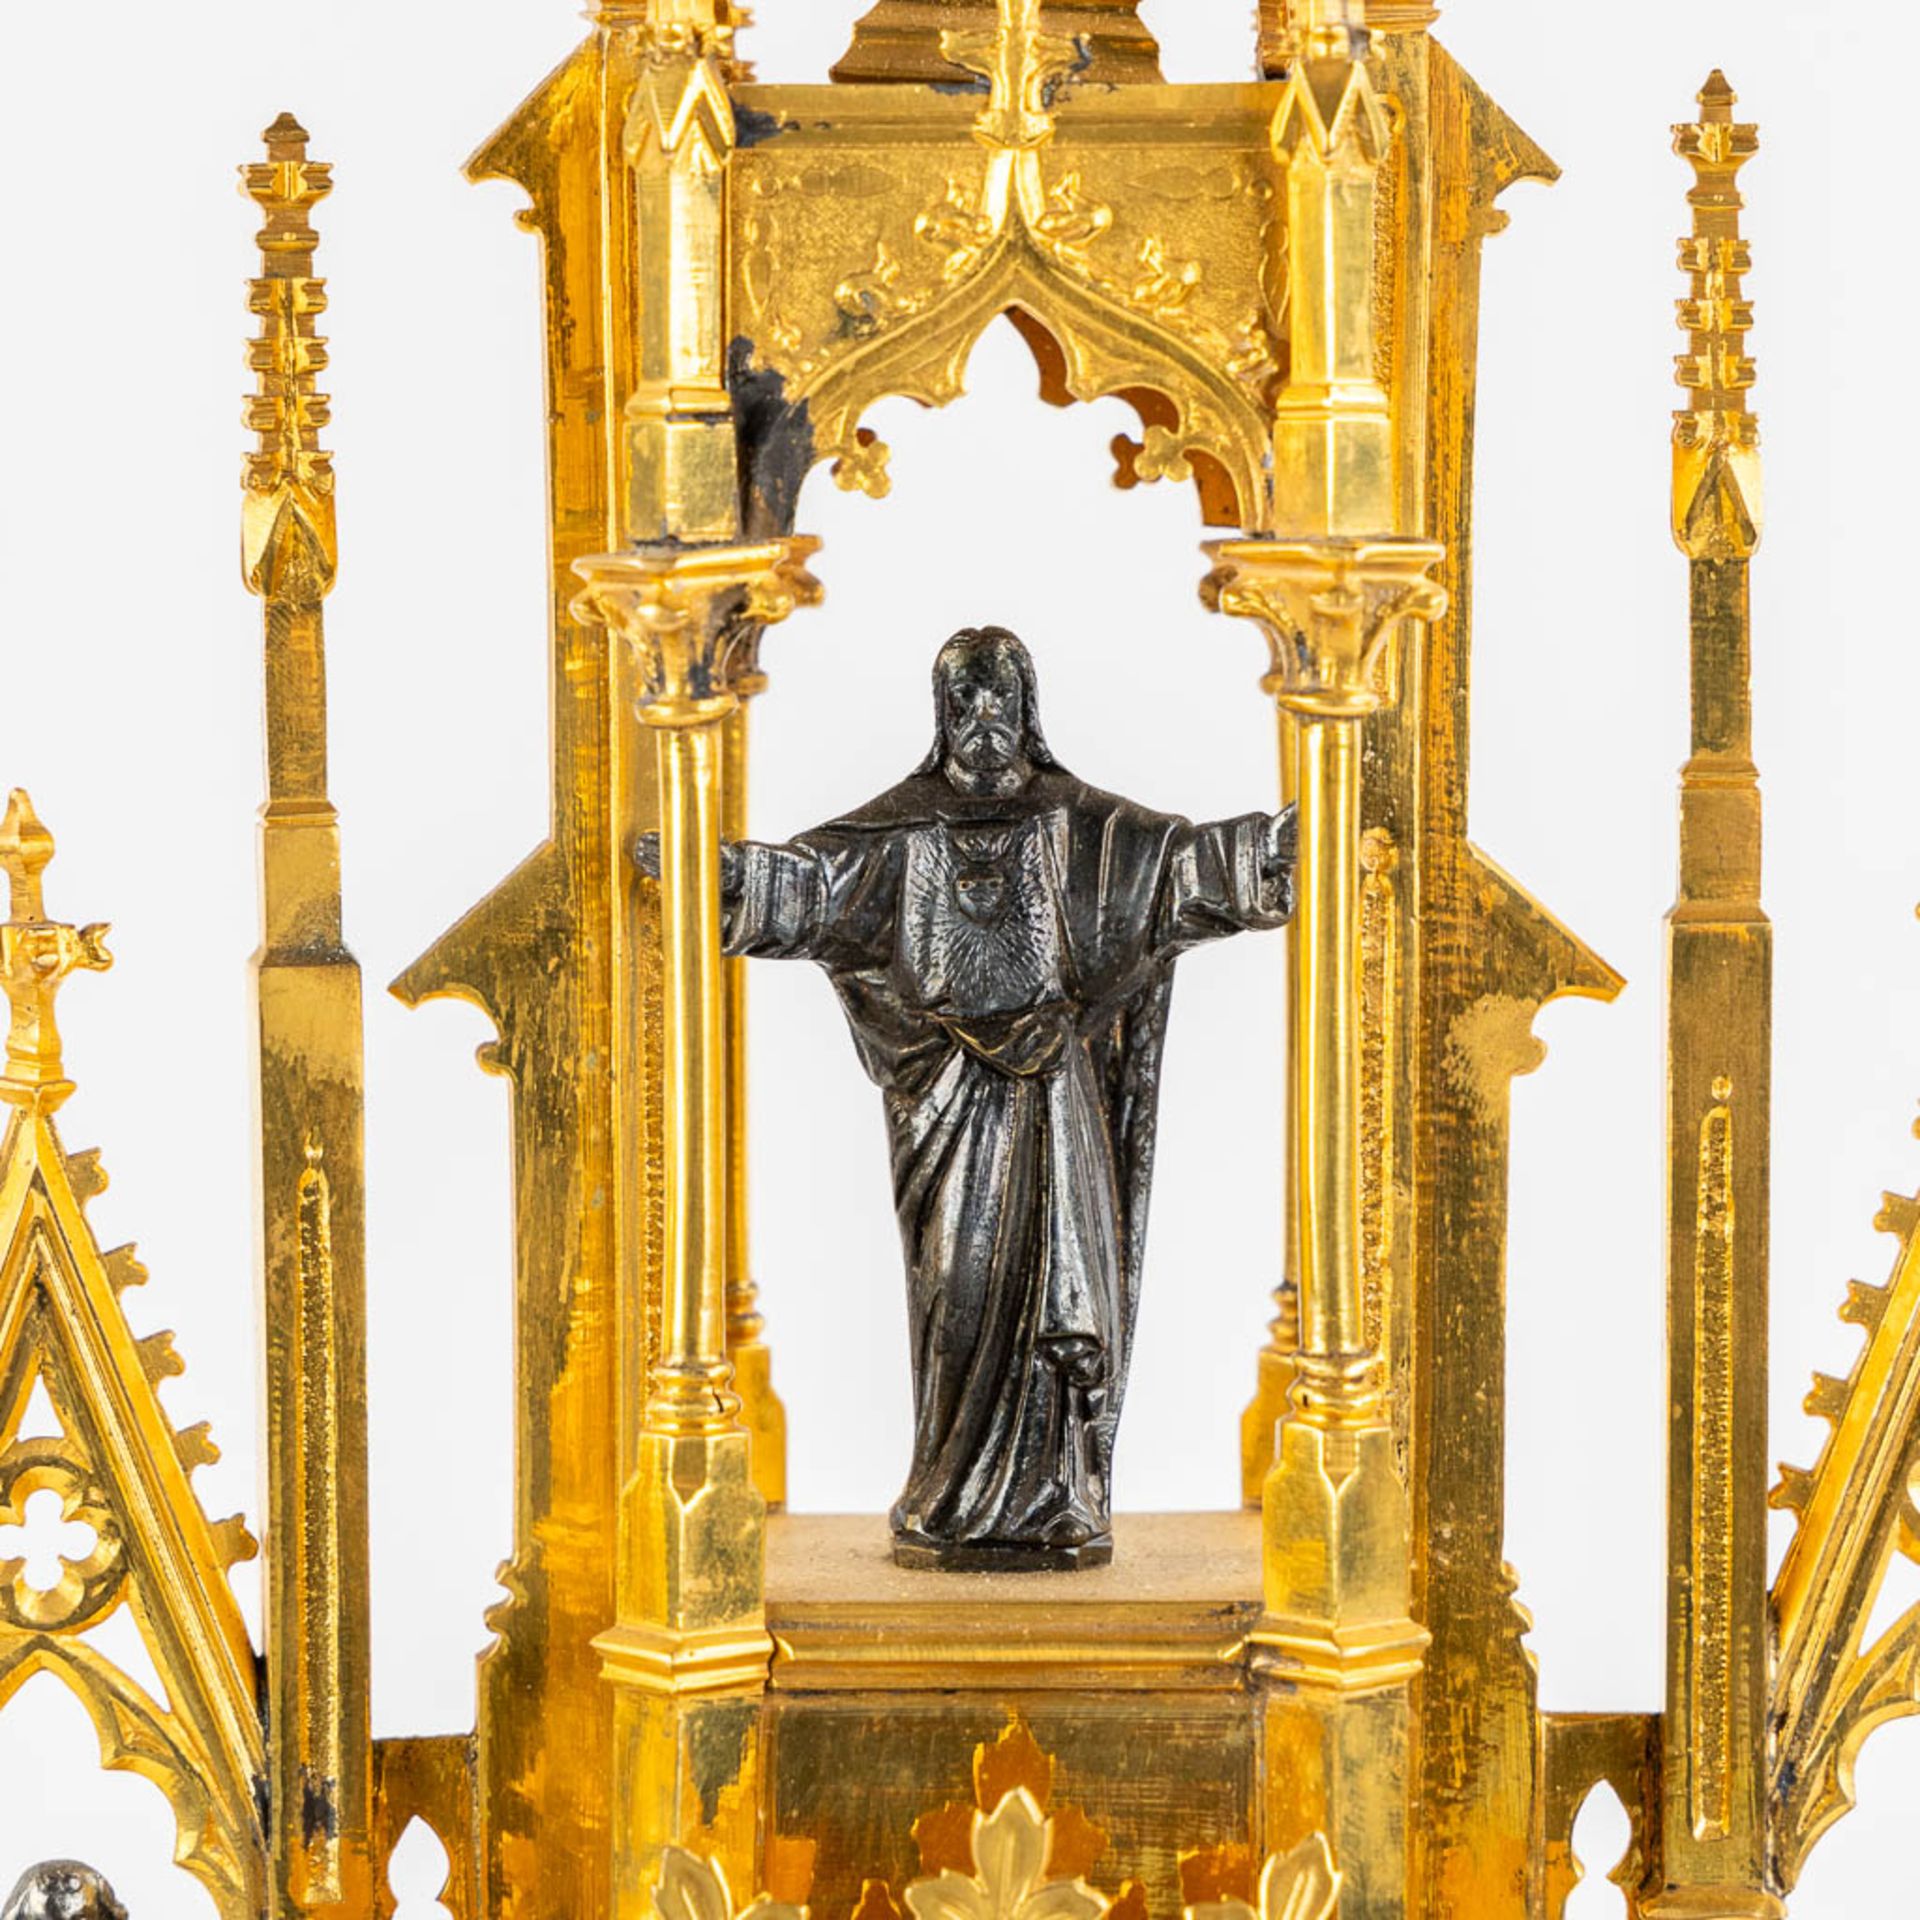 A Tower monstrance, gilt and silver plated brass, Gothic Revival. 19th C. (W:21,5 x H:58 cm) - Image 2 of 22